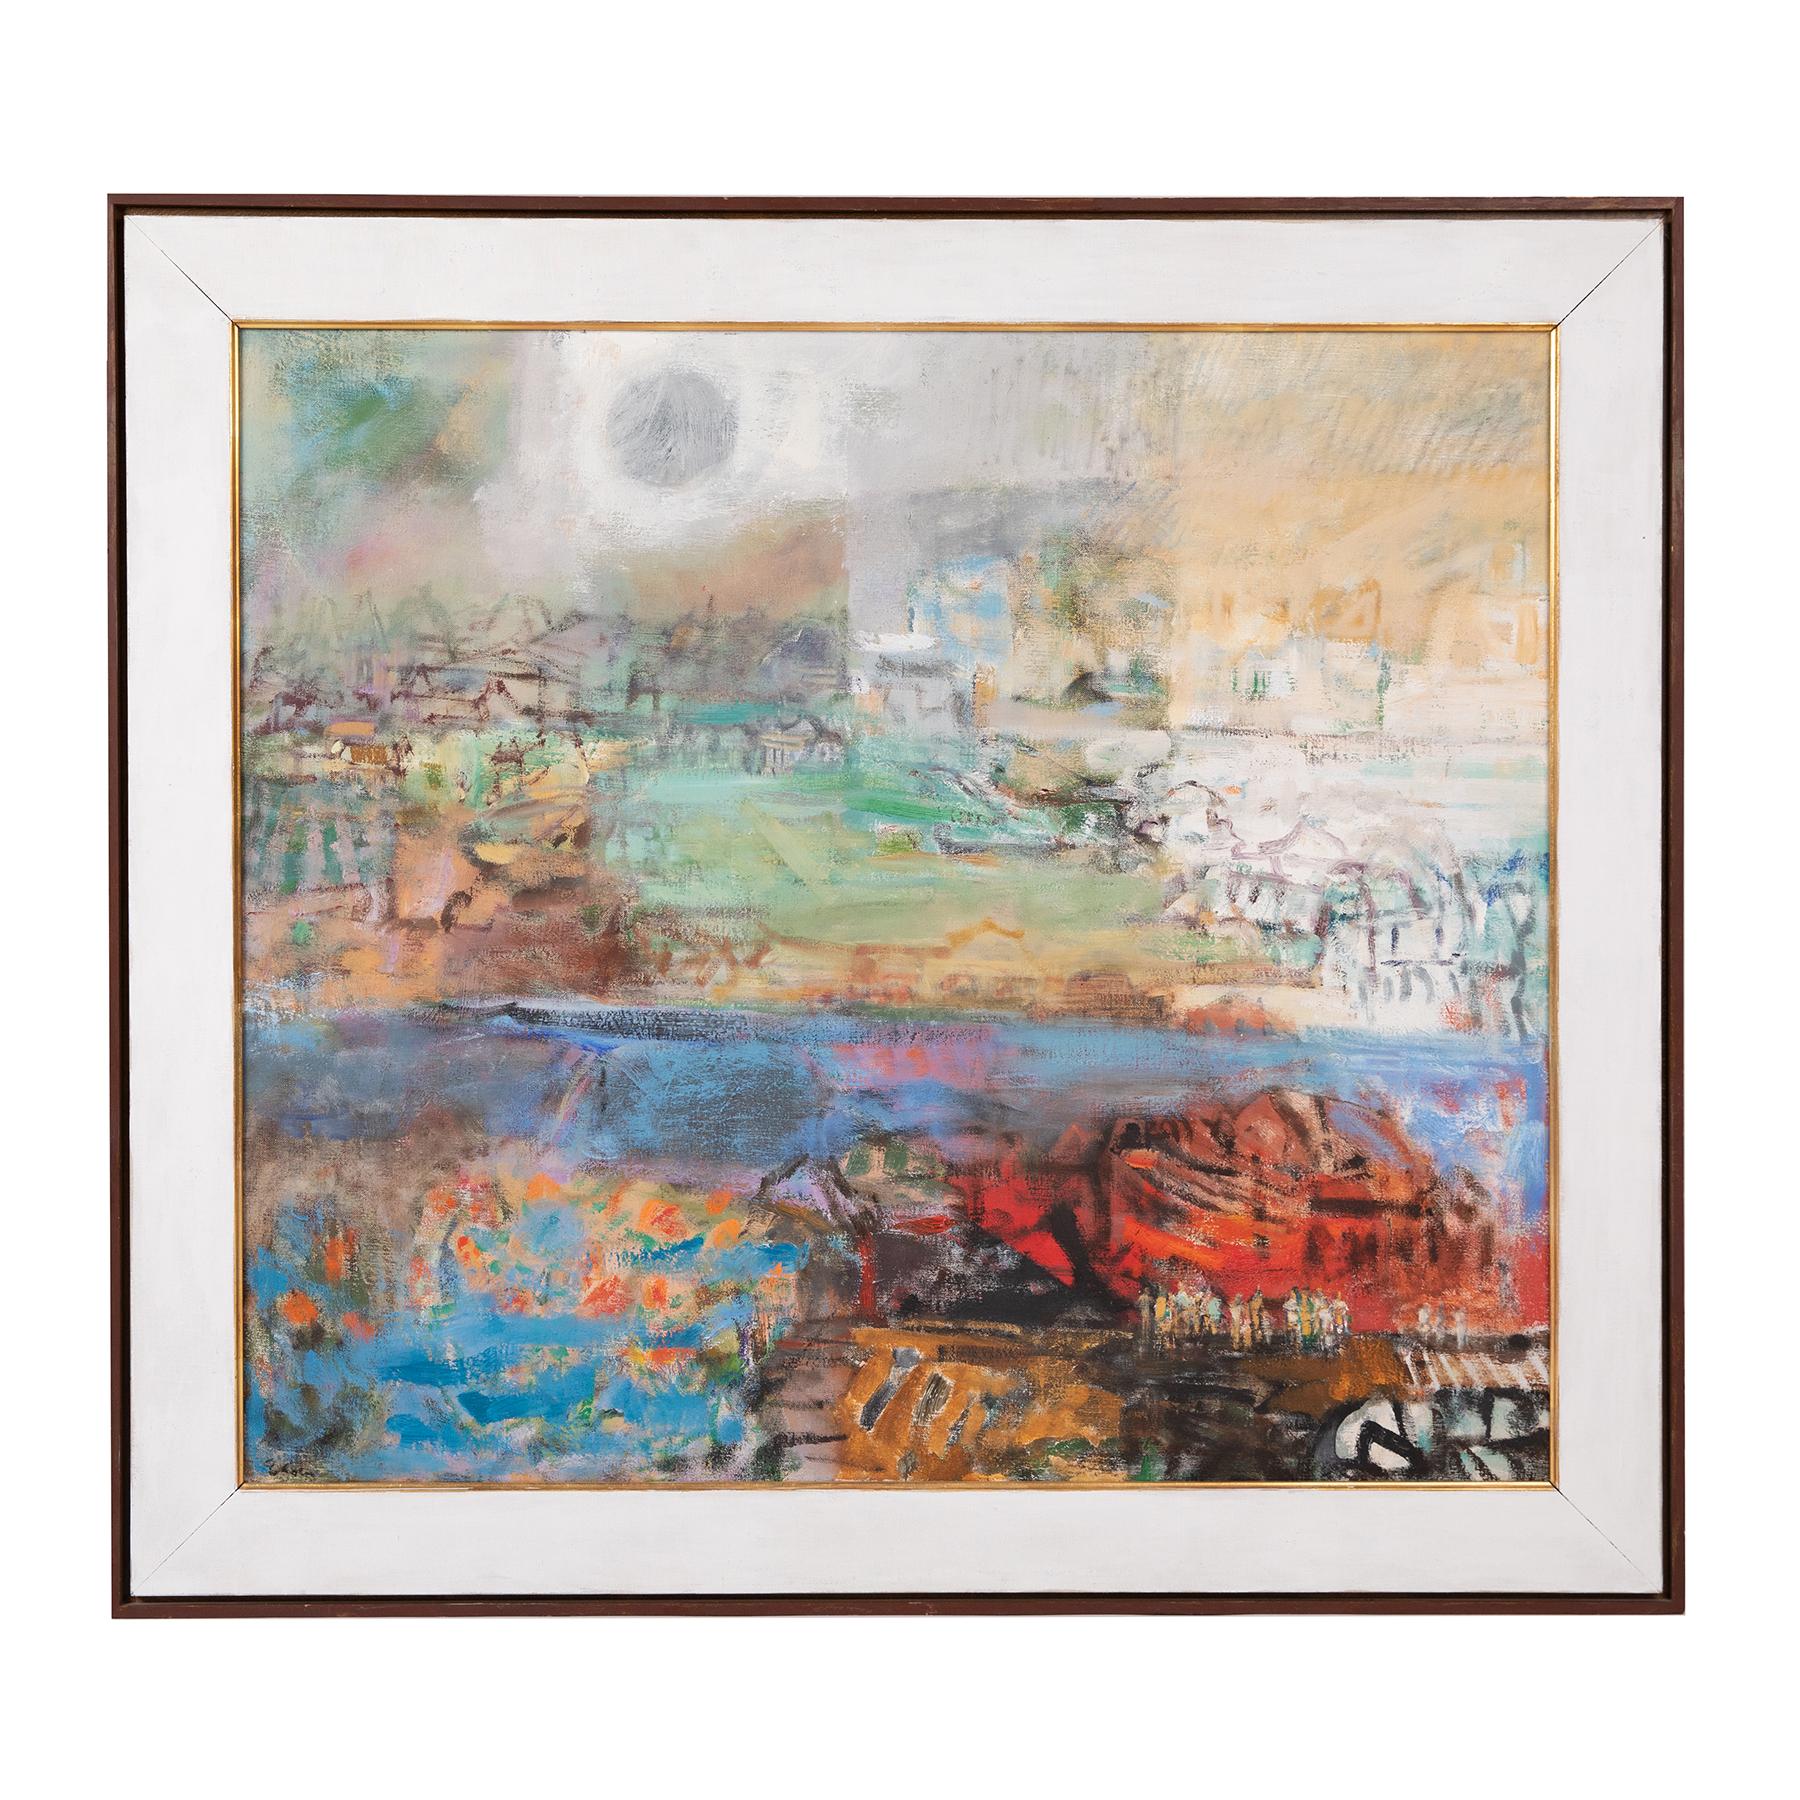 This multicolored expressionist style painting by American artist Eleanor Coen depicts the layered feeling of a city with its patchwork of buildings and landscape intersected by a bright periwinkle river. Her work often found inspiration in urban